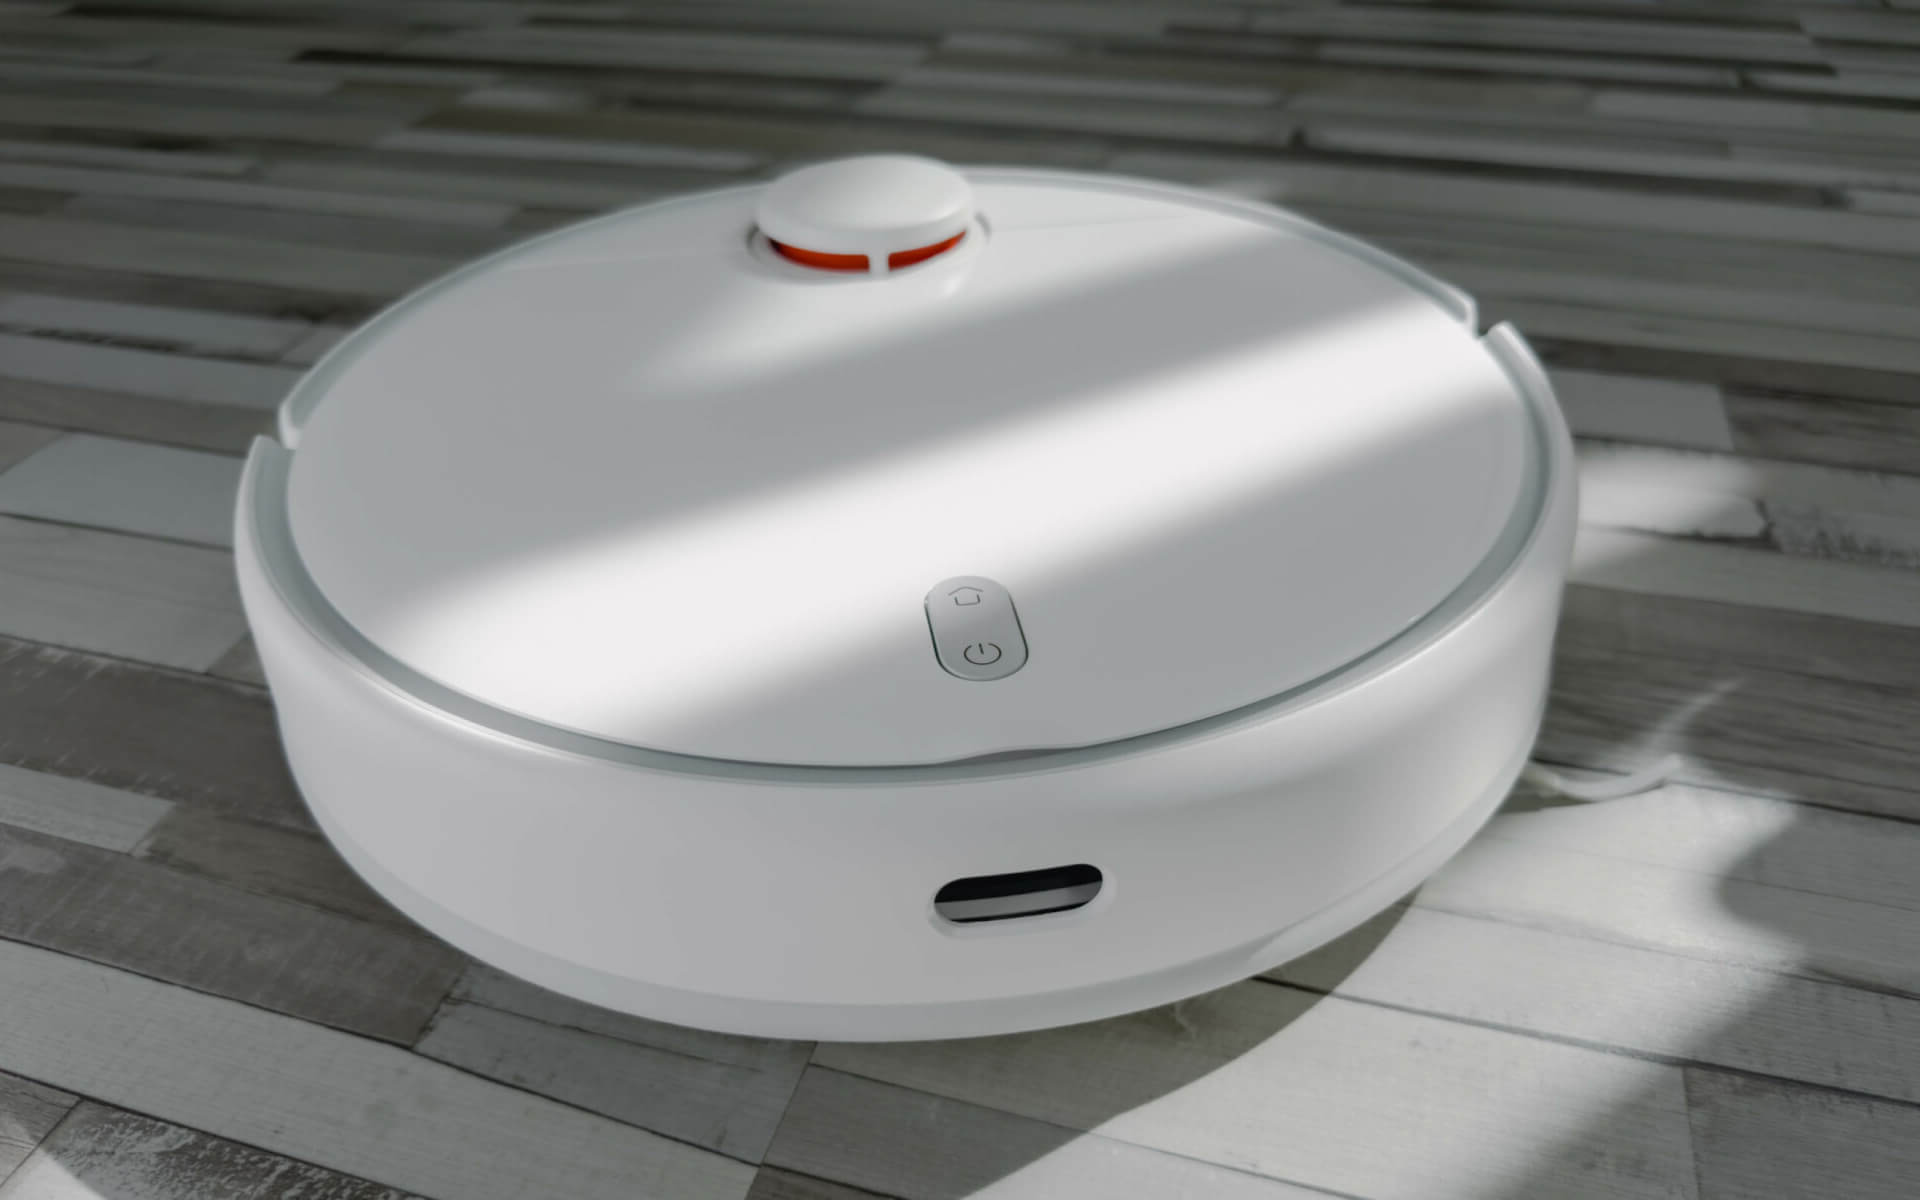 Automated Cleanups: Mastering Scheduled Cleanup On Xiaomi Robot Vacuum